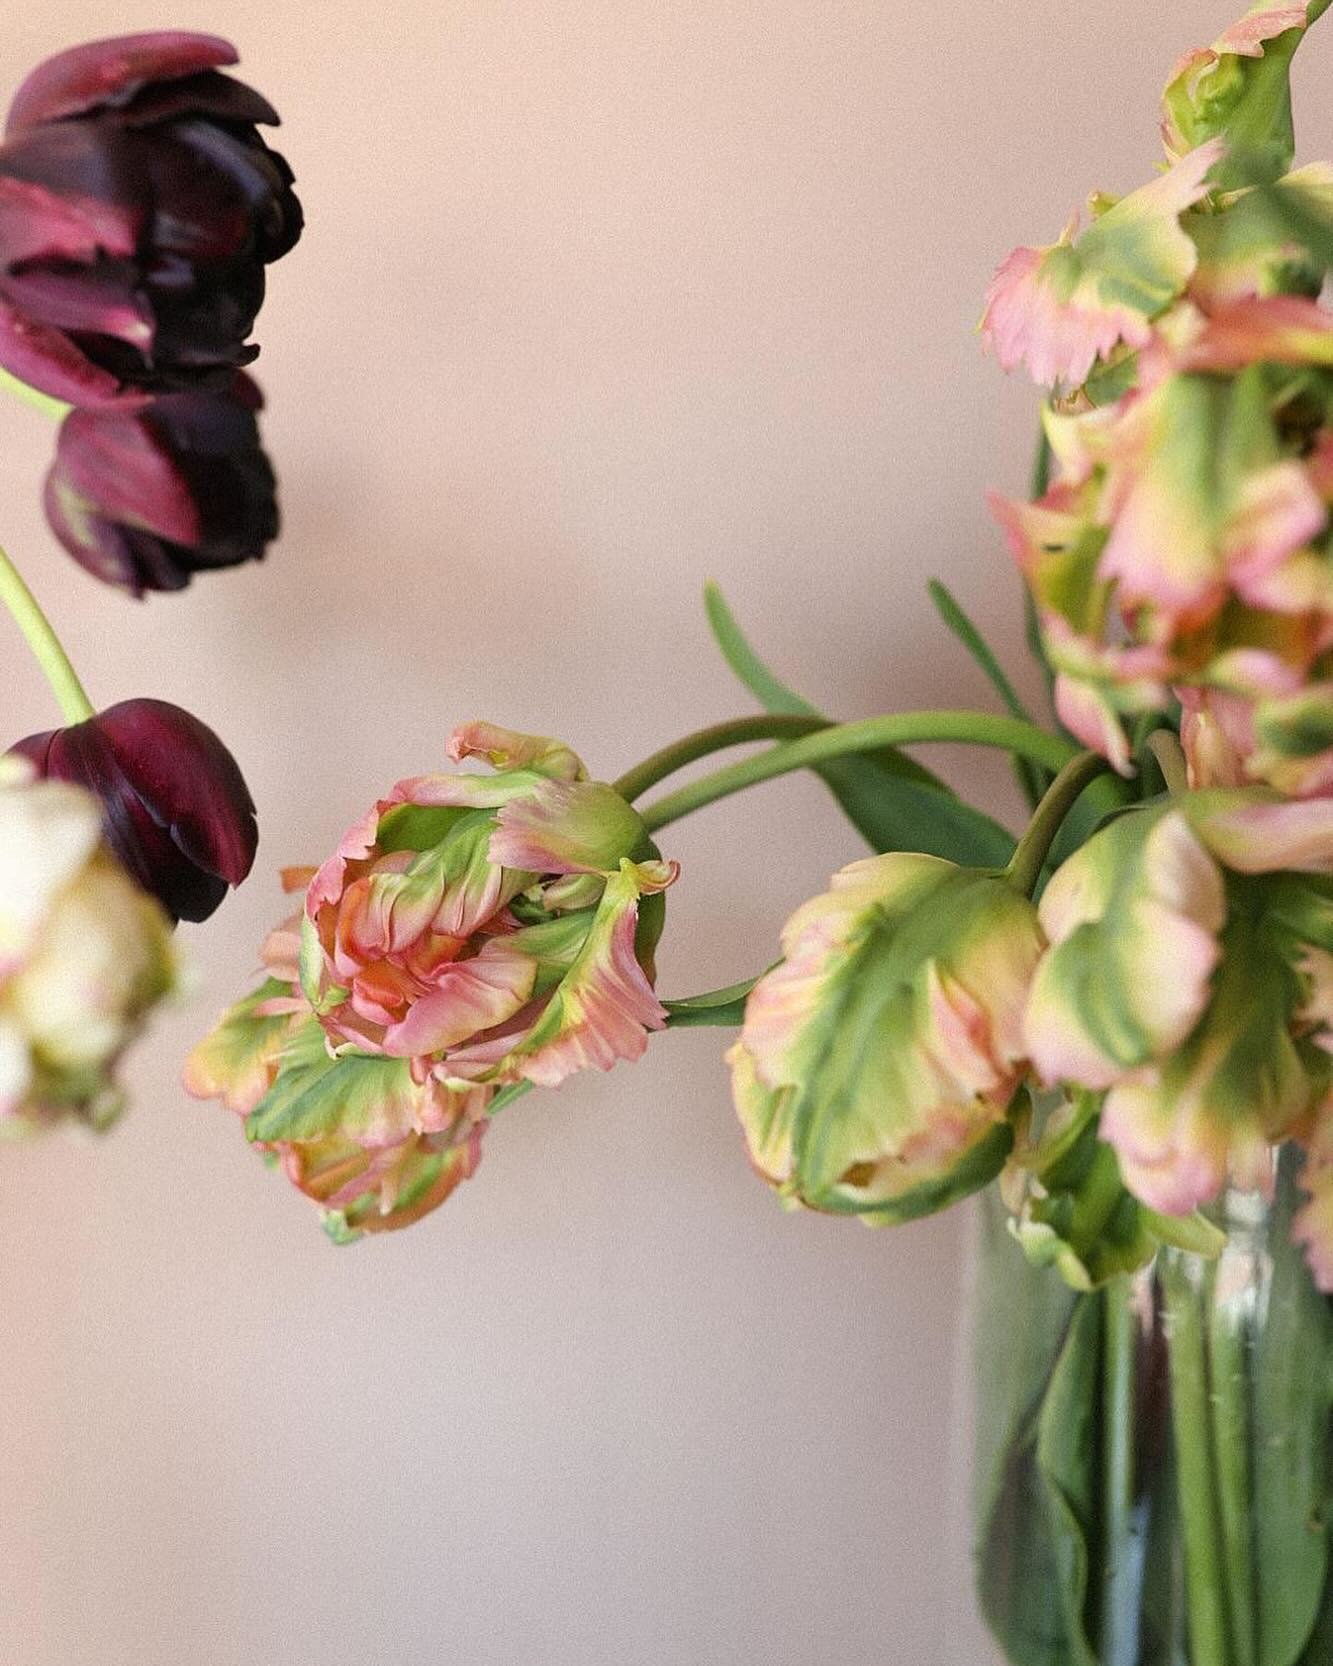 According to the doyenne of floristry, Constance Spry, &lsquo;some tulips last so long you could almost dust them off and others you can&rsquo;t trust overnight&rsquo;
It was last year that Jo @ombersleyflowerfarm first wowed us with her beautiful tu